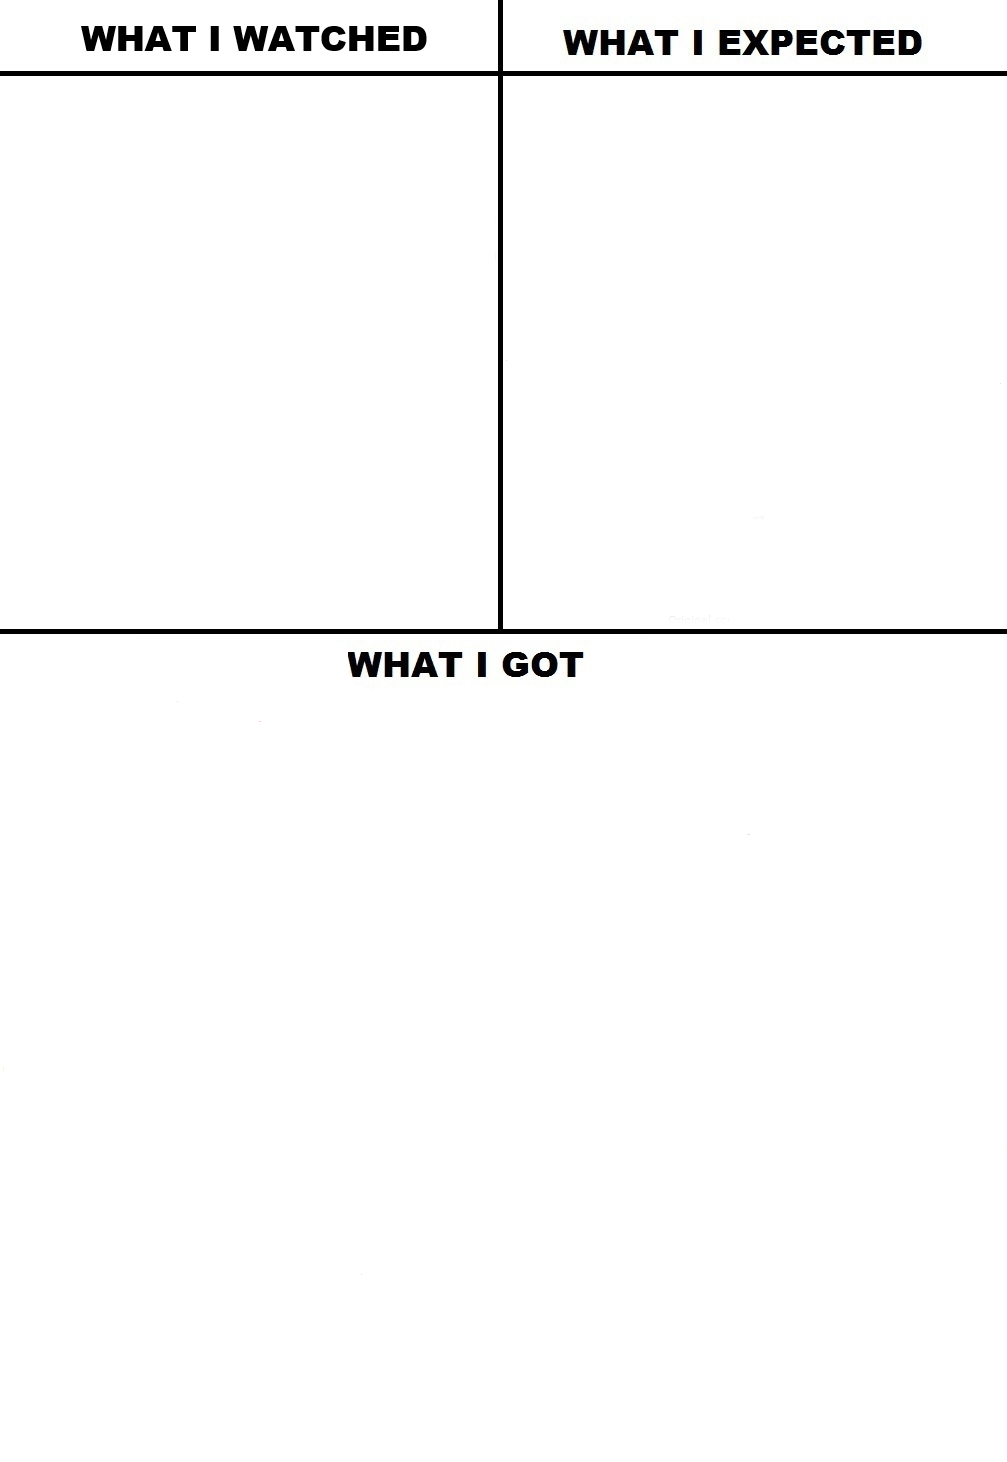 High Quality What I watched what I expected and what I got Blank Meme Template